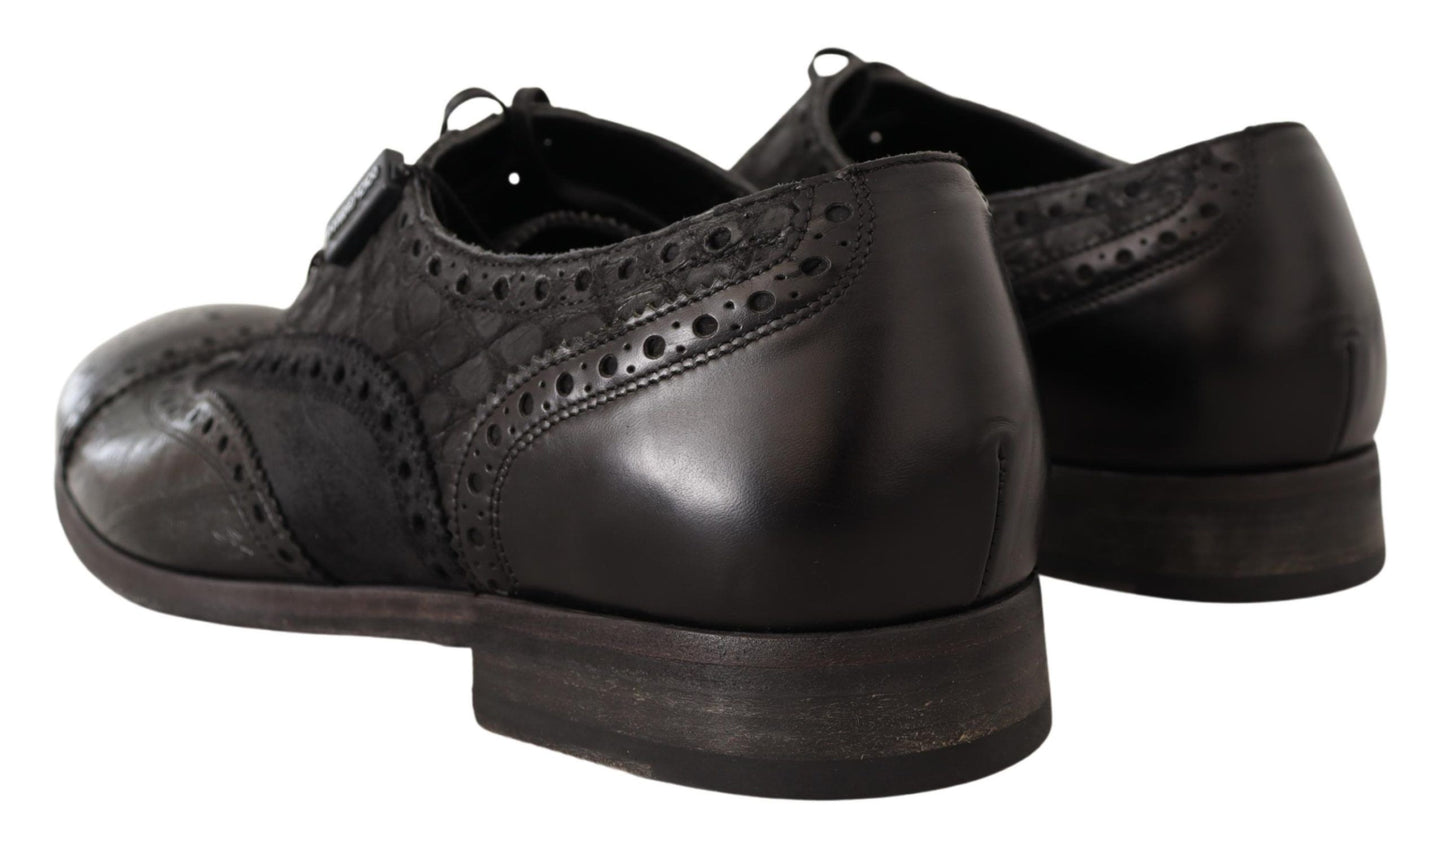 Dolce & Gabbana Exotic Leather Brogue Derby Dress Shoes